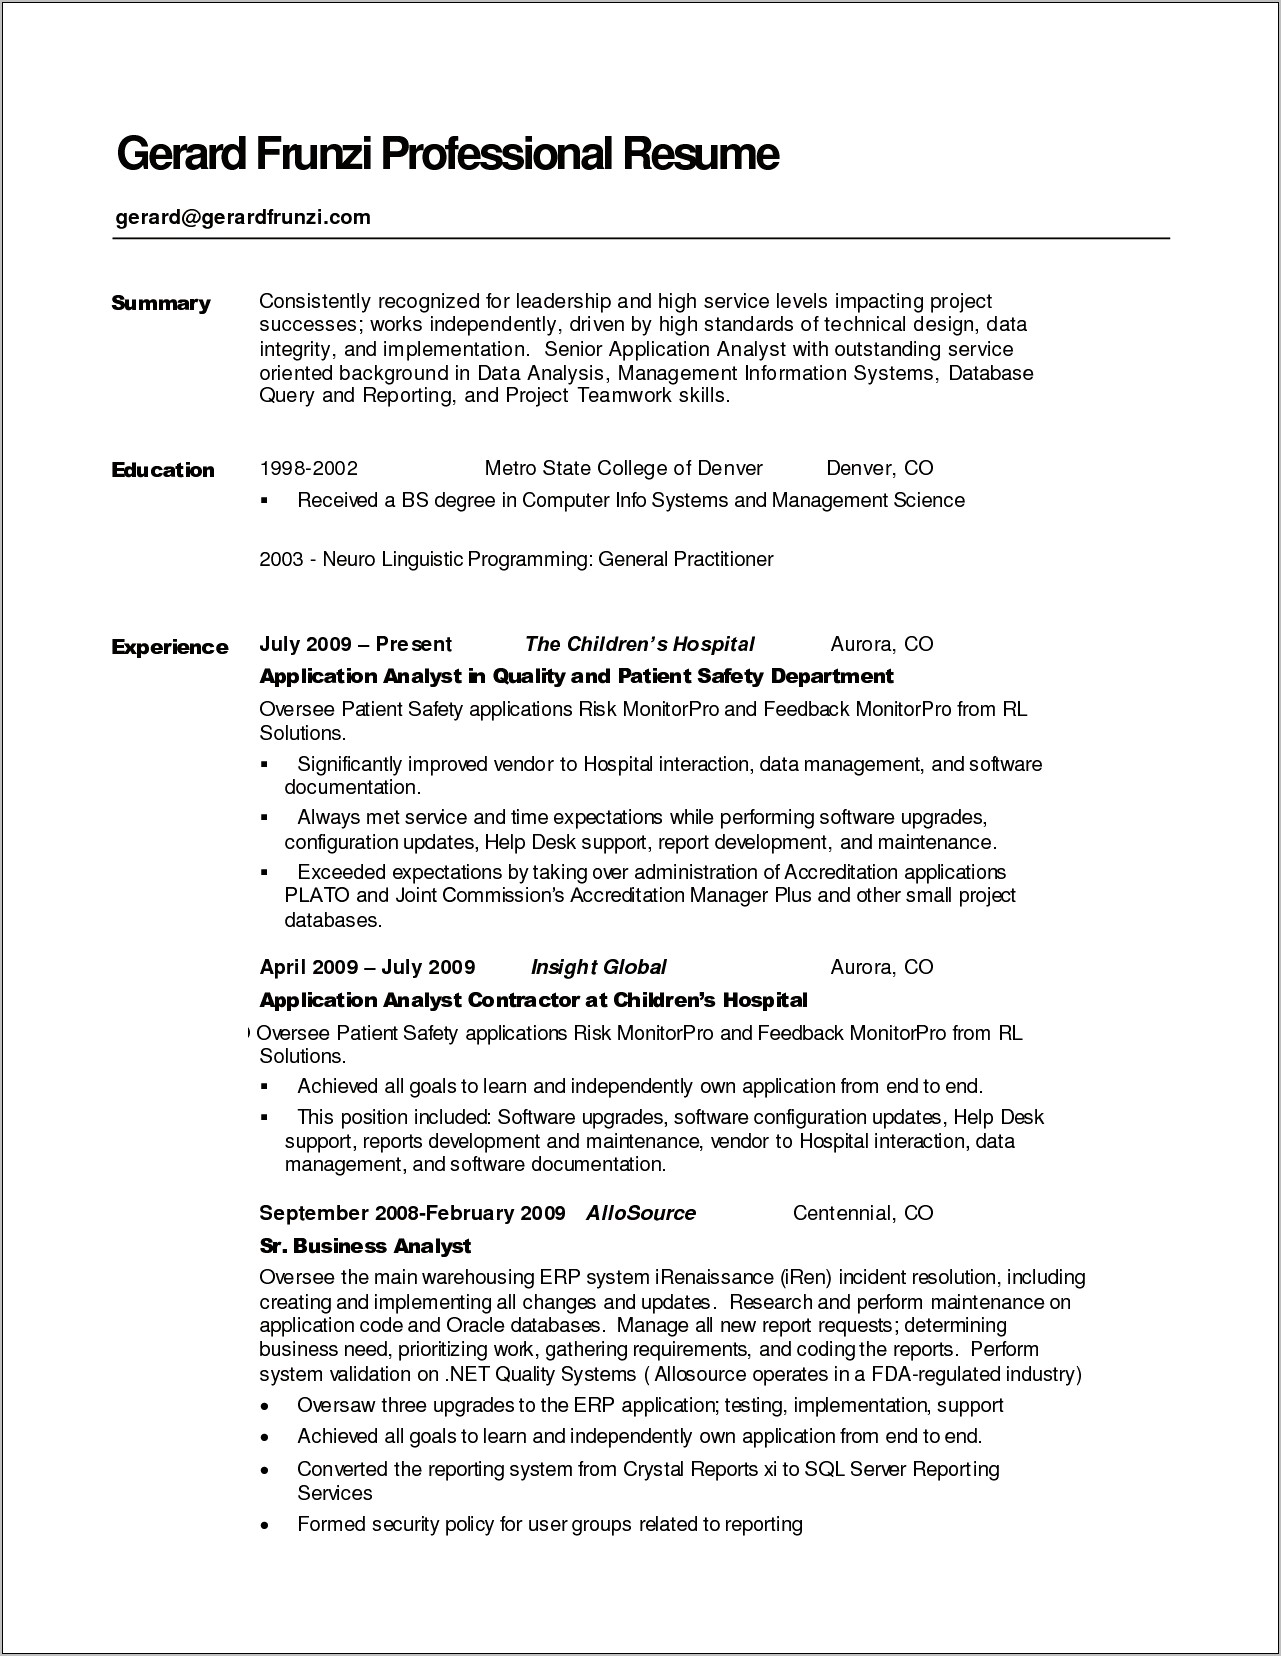 Sample Resume Summary Statements About Job Qualifications